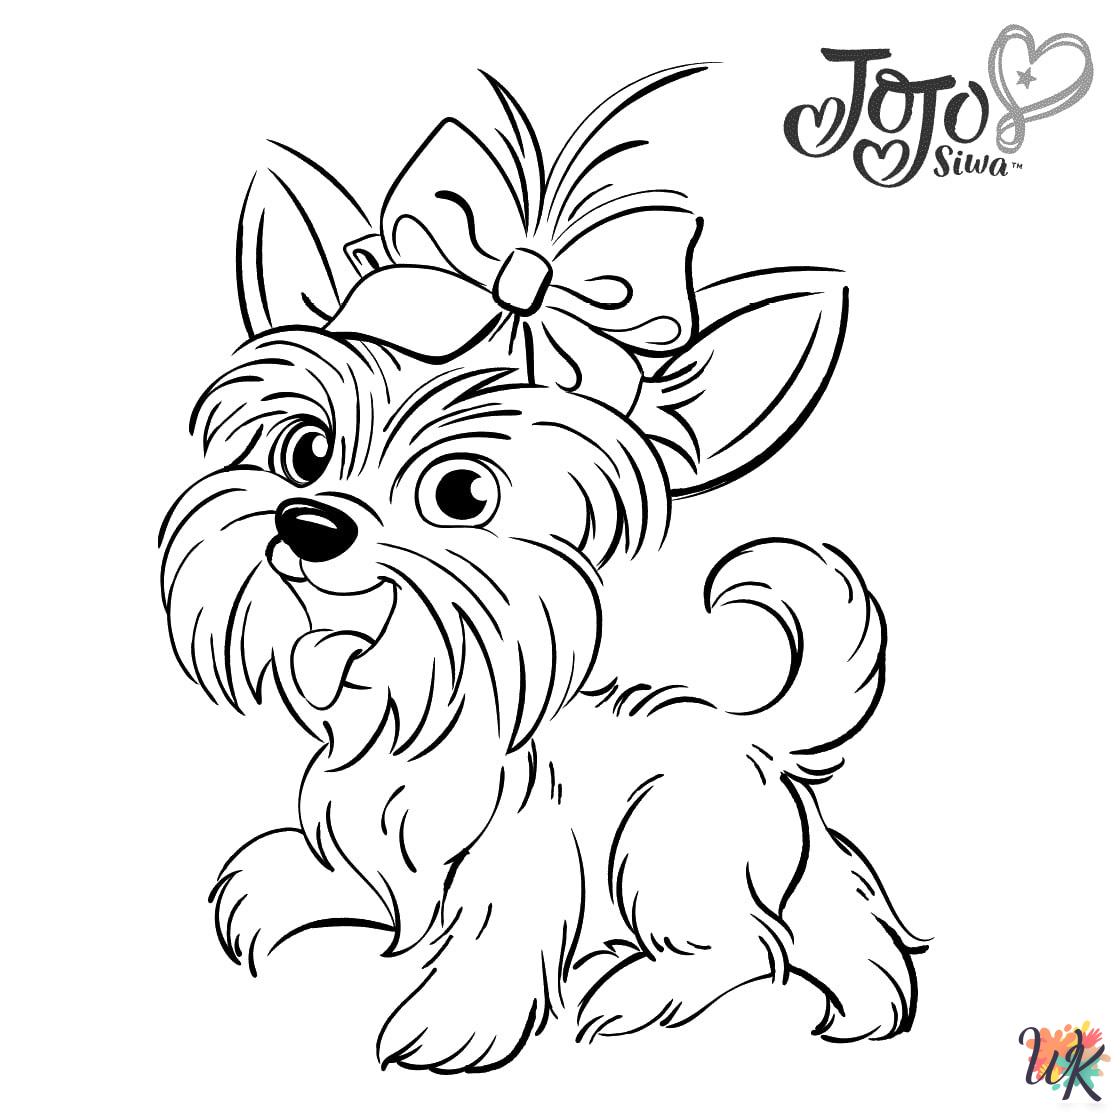 JoJo Siwa coloring pages for adults